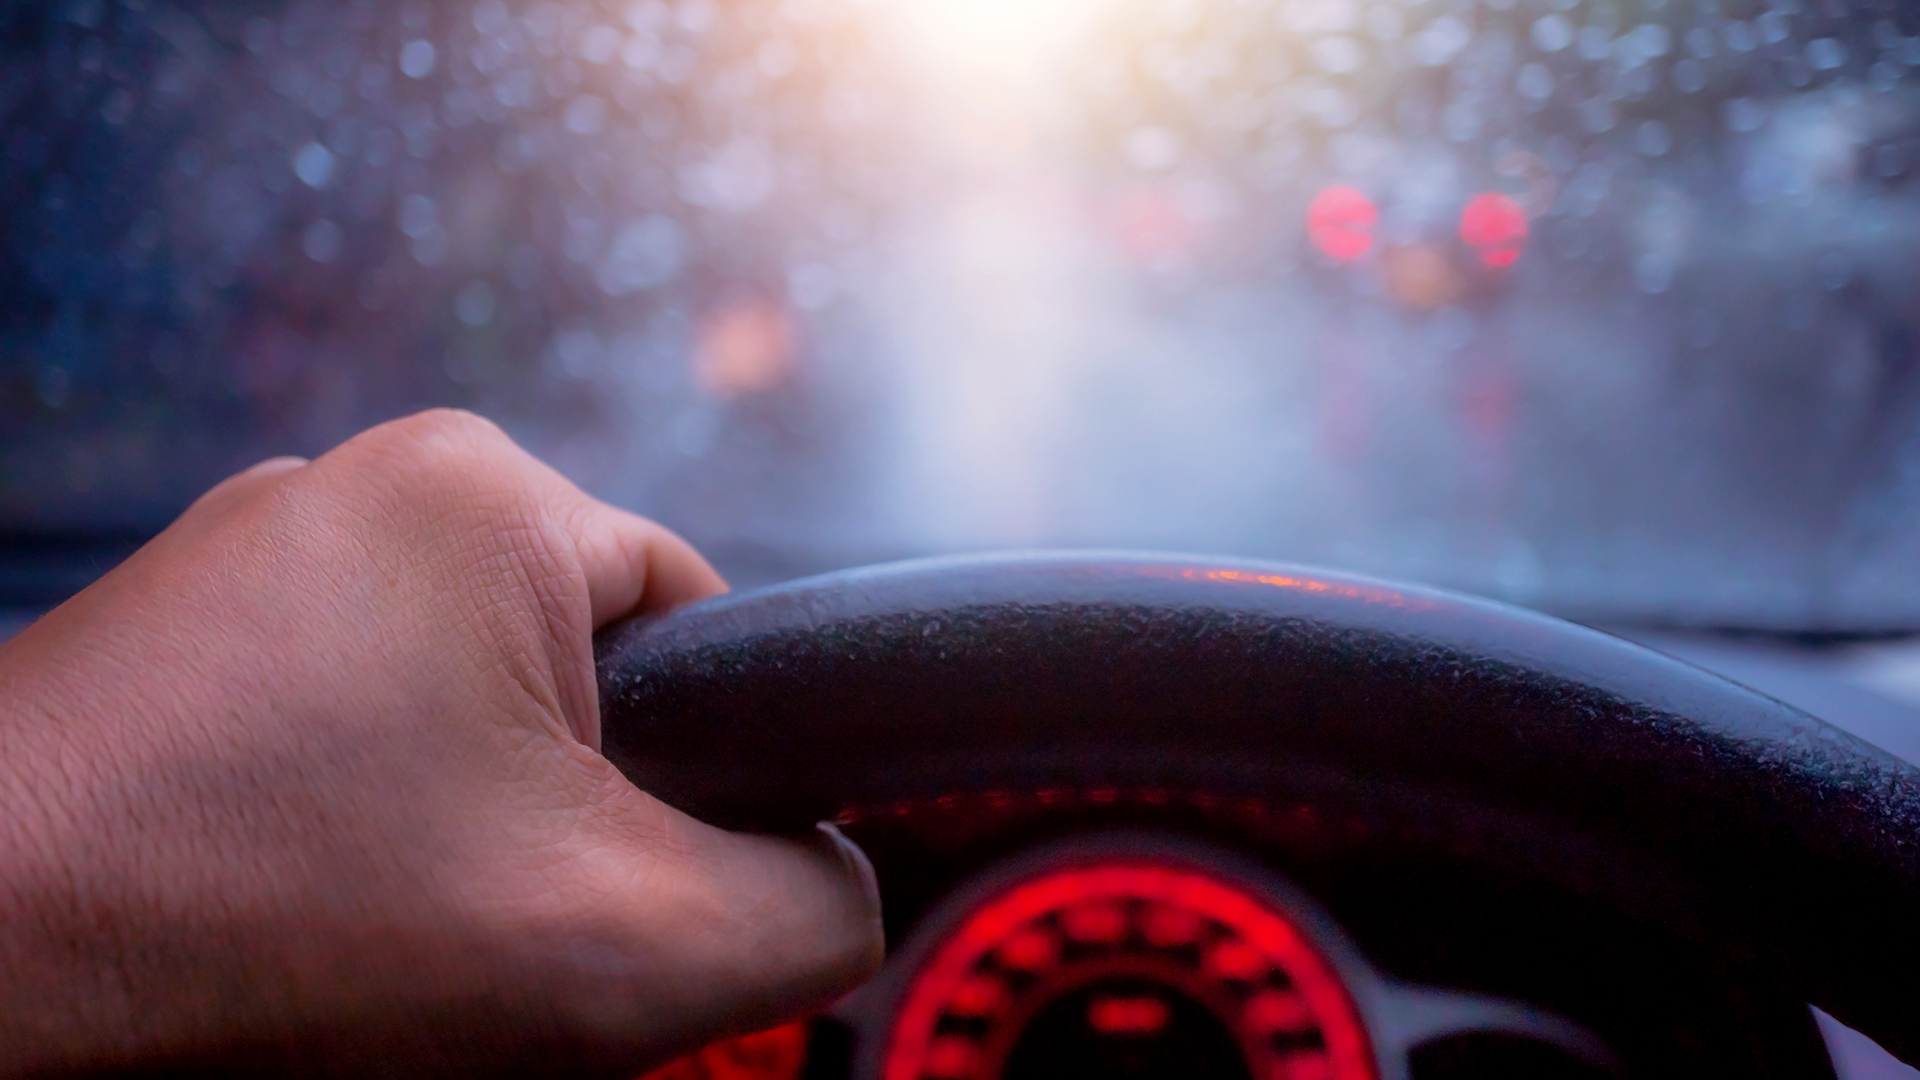 Keeping Safe While Driving In South Florida Rain 1 Auto Accident Lawyer Boca Raton South Florida Injury Law Firm